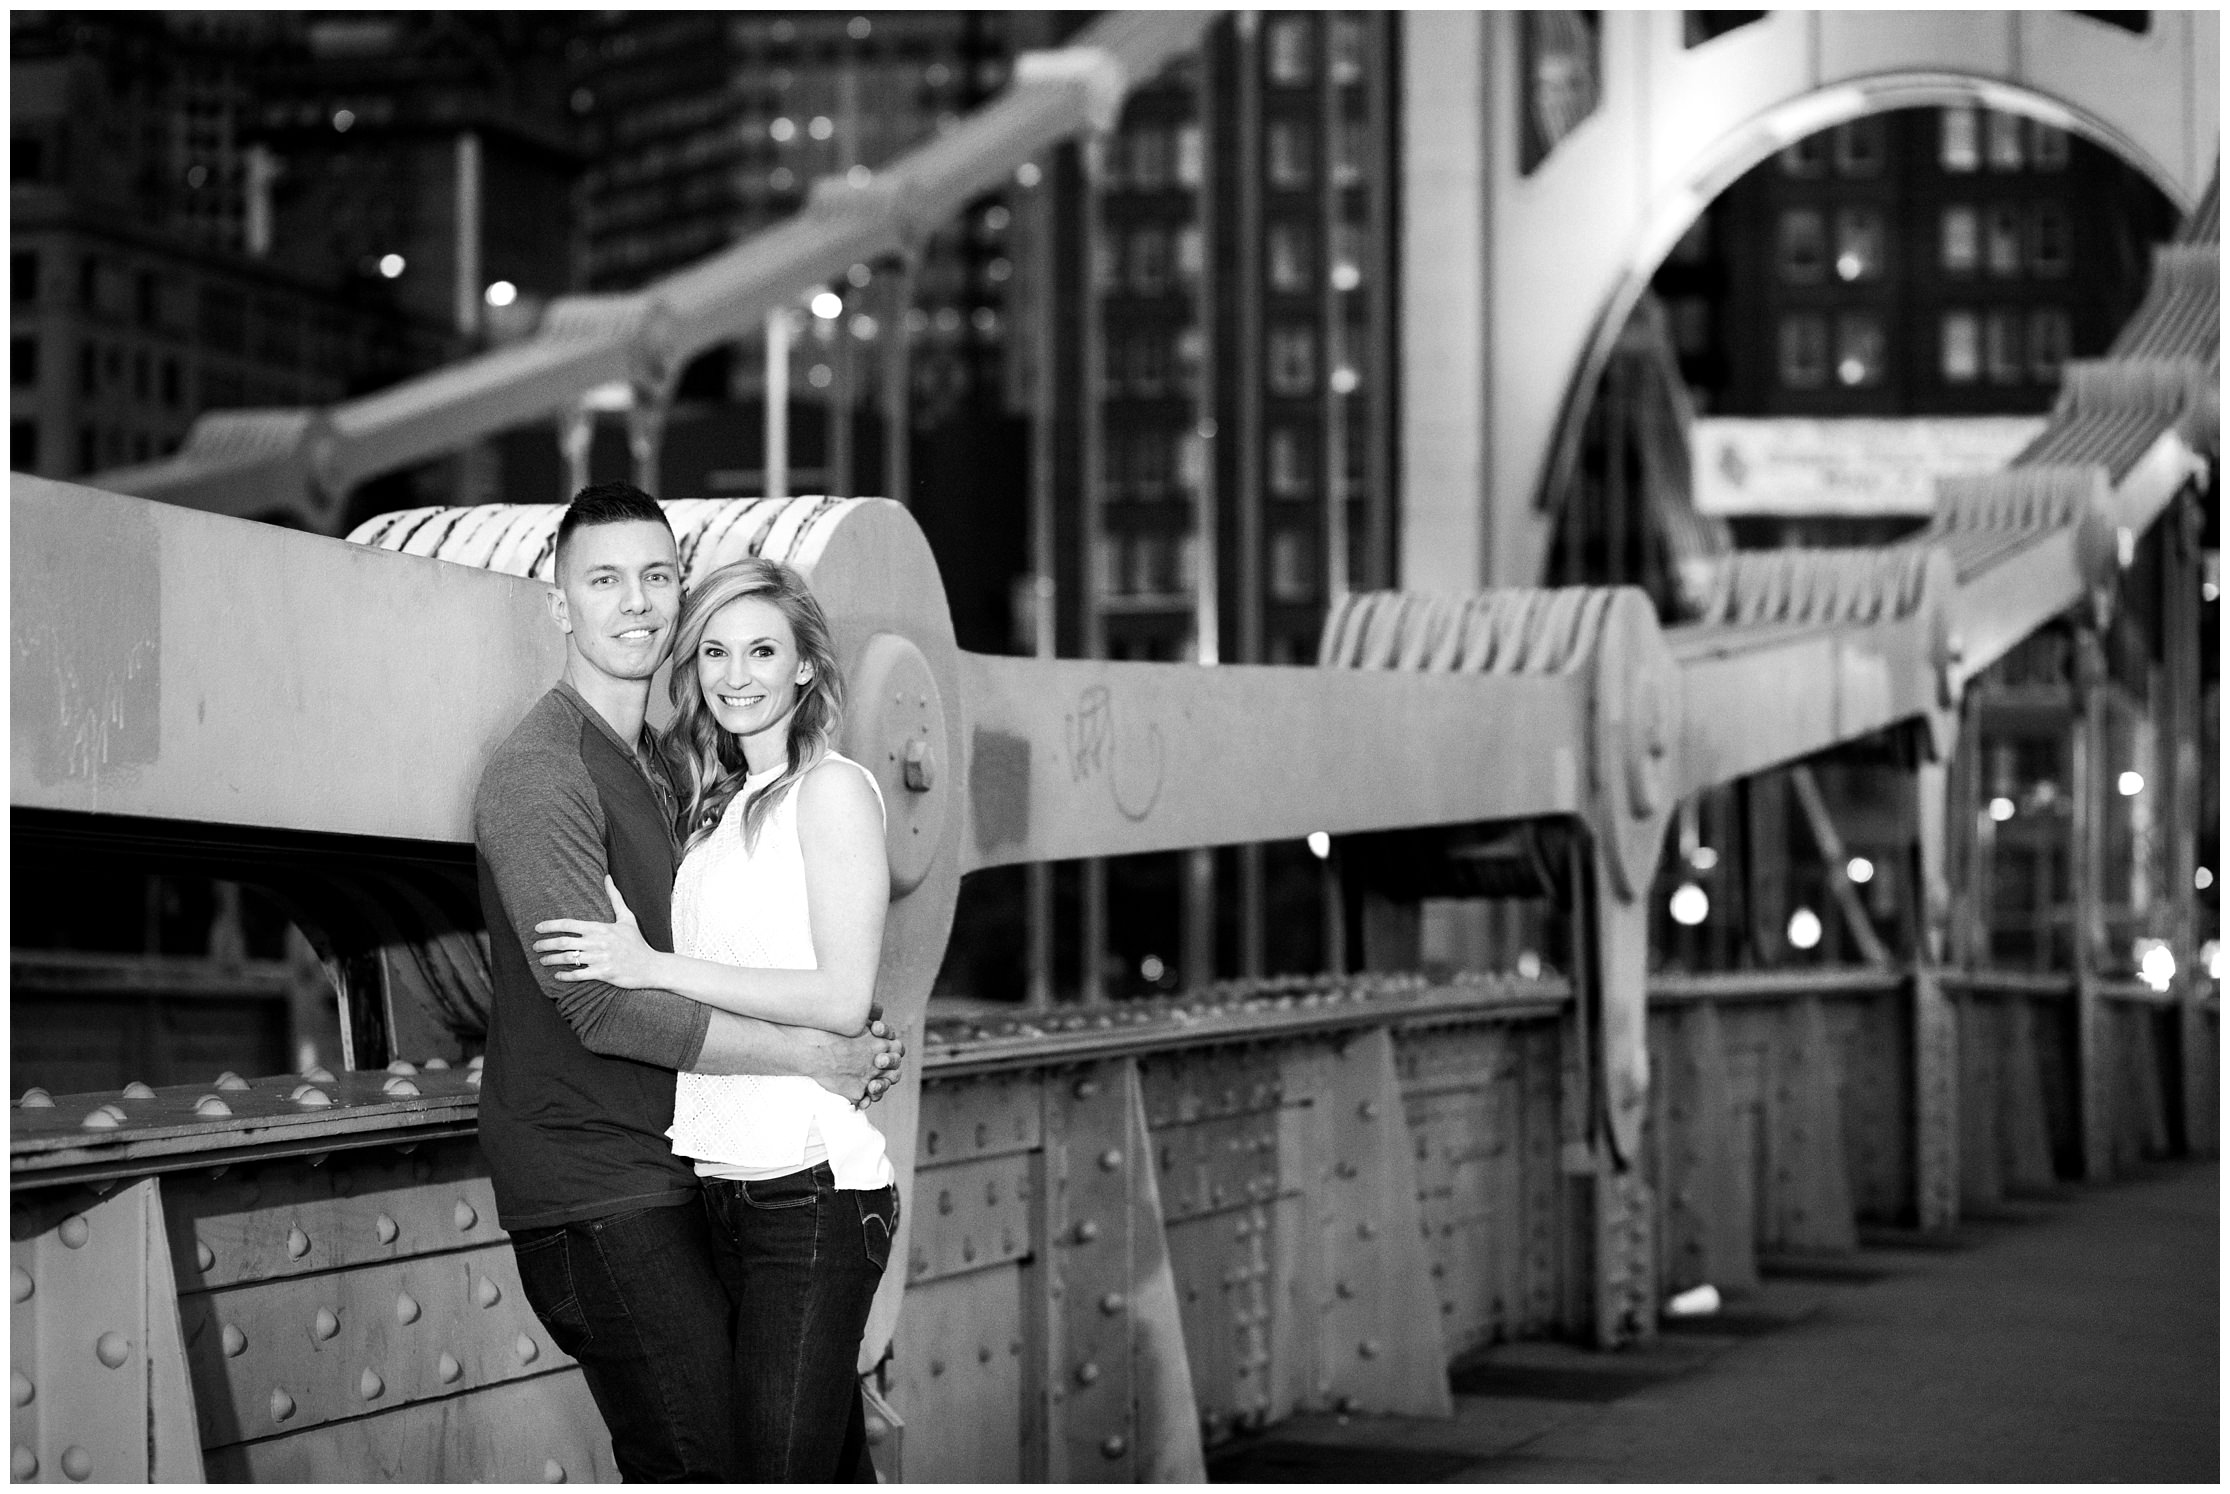 black and white engagement photography, black and white pittsburgh engagement photo, clemente bridge pittsburgh, city engagement, city engagement photography, yellow bridge pittsburgh, yellow bridge photo shoot pittsburgh, clemente bridge engagement, fun pittsburgh engagement photography, romantic pittsburgh engagement photography, pittsburgh engagement photographer, pittsburgh engagement photography, pittsburgh engagement, pittsburgh wedding photographer, pittsburgh wedding photography, pittsburgh wedding, pittsburgh north shore, pittsburgh skyline, pittsburgh couple, engagement photo, engagement photography,